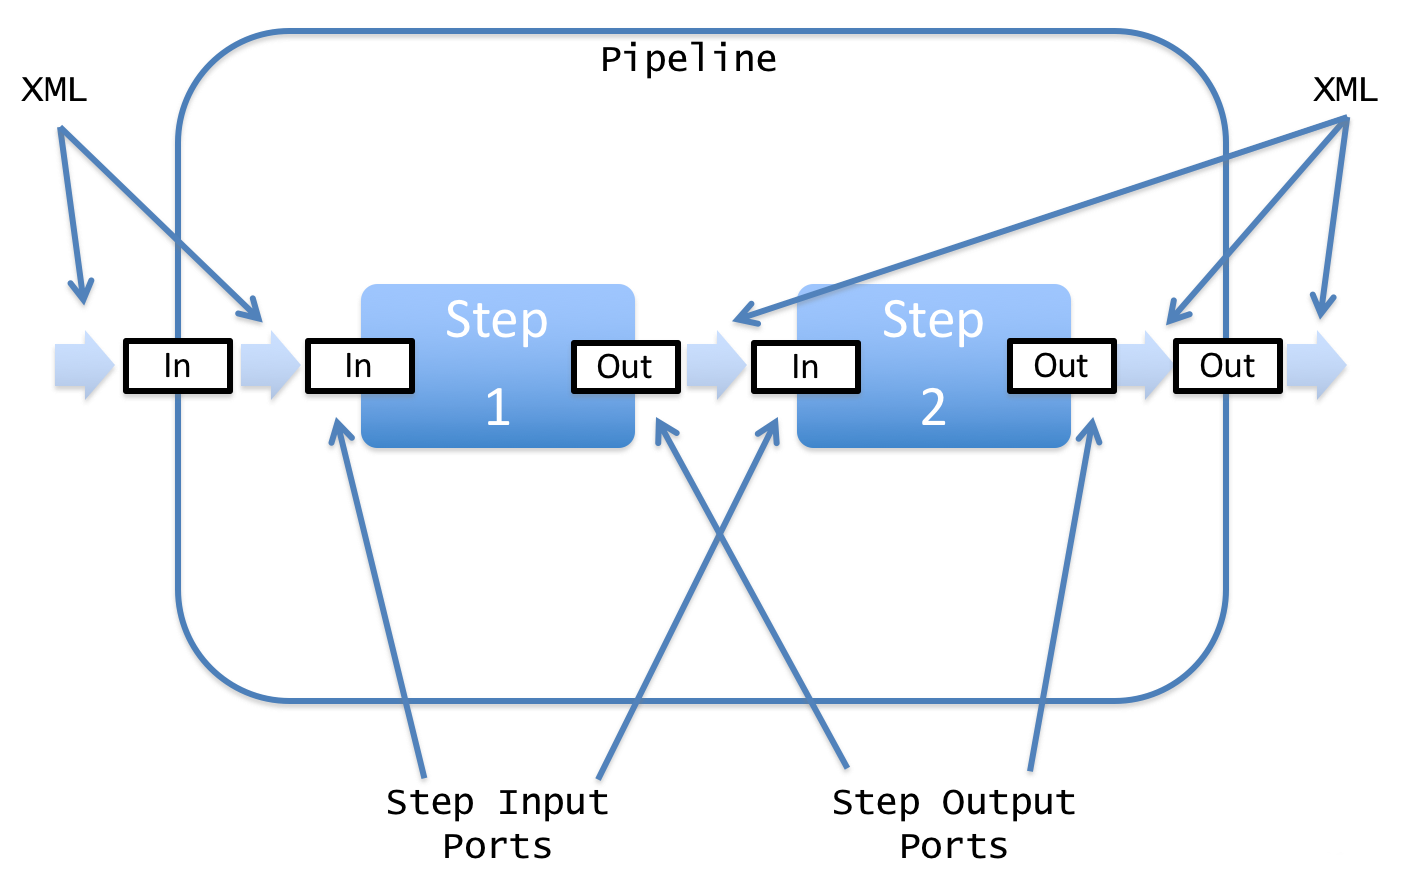 pipelines, steps, and ports